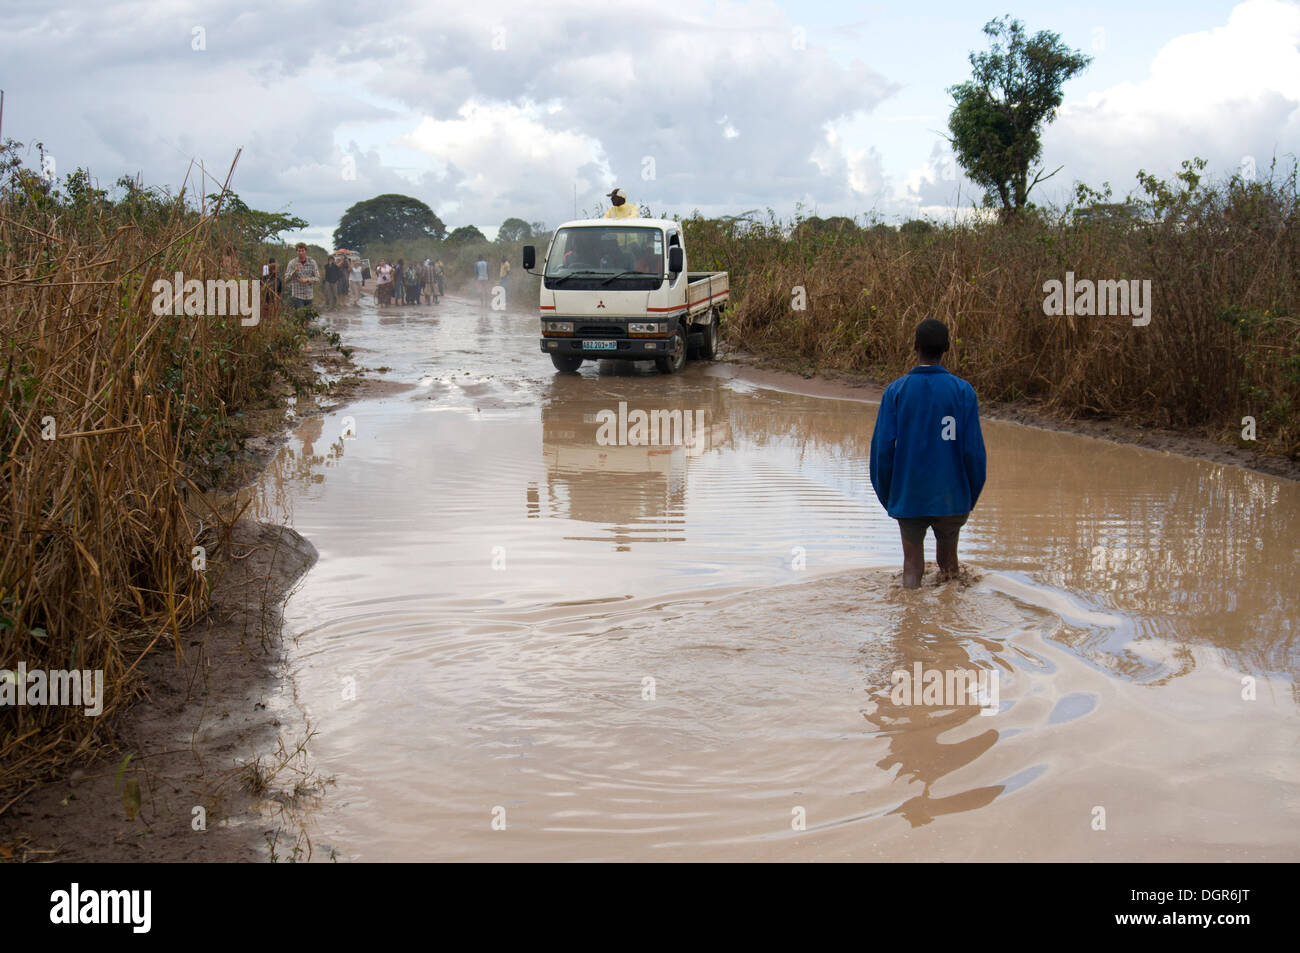 Mozambique, a man in a blue jacket standing in a flooded road in the bush, a van trying to cross. Stock Photo